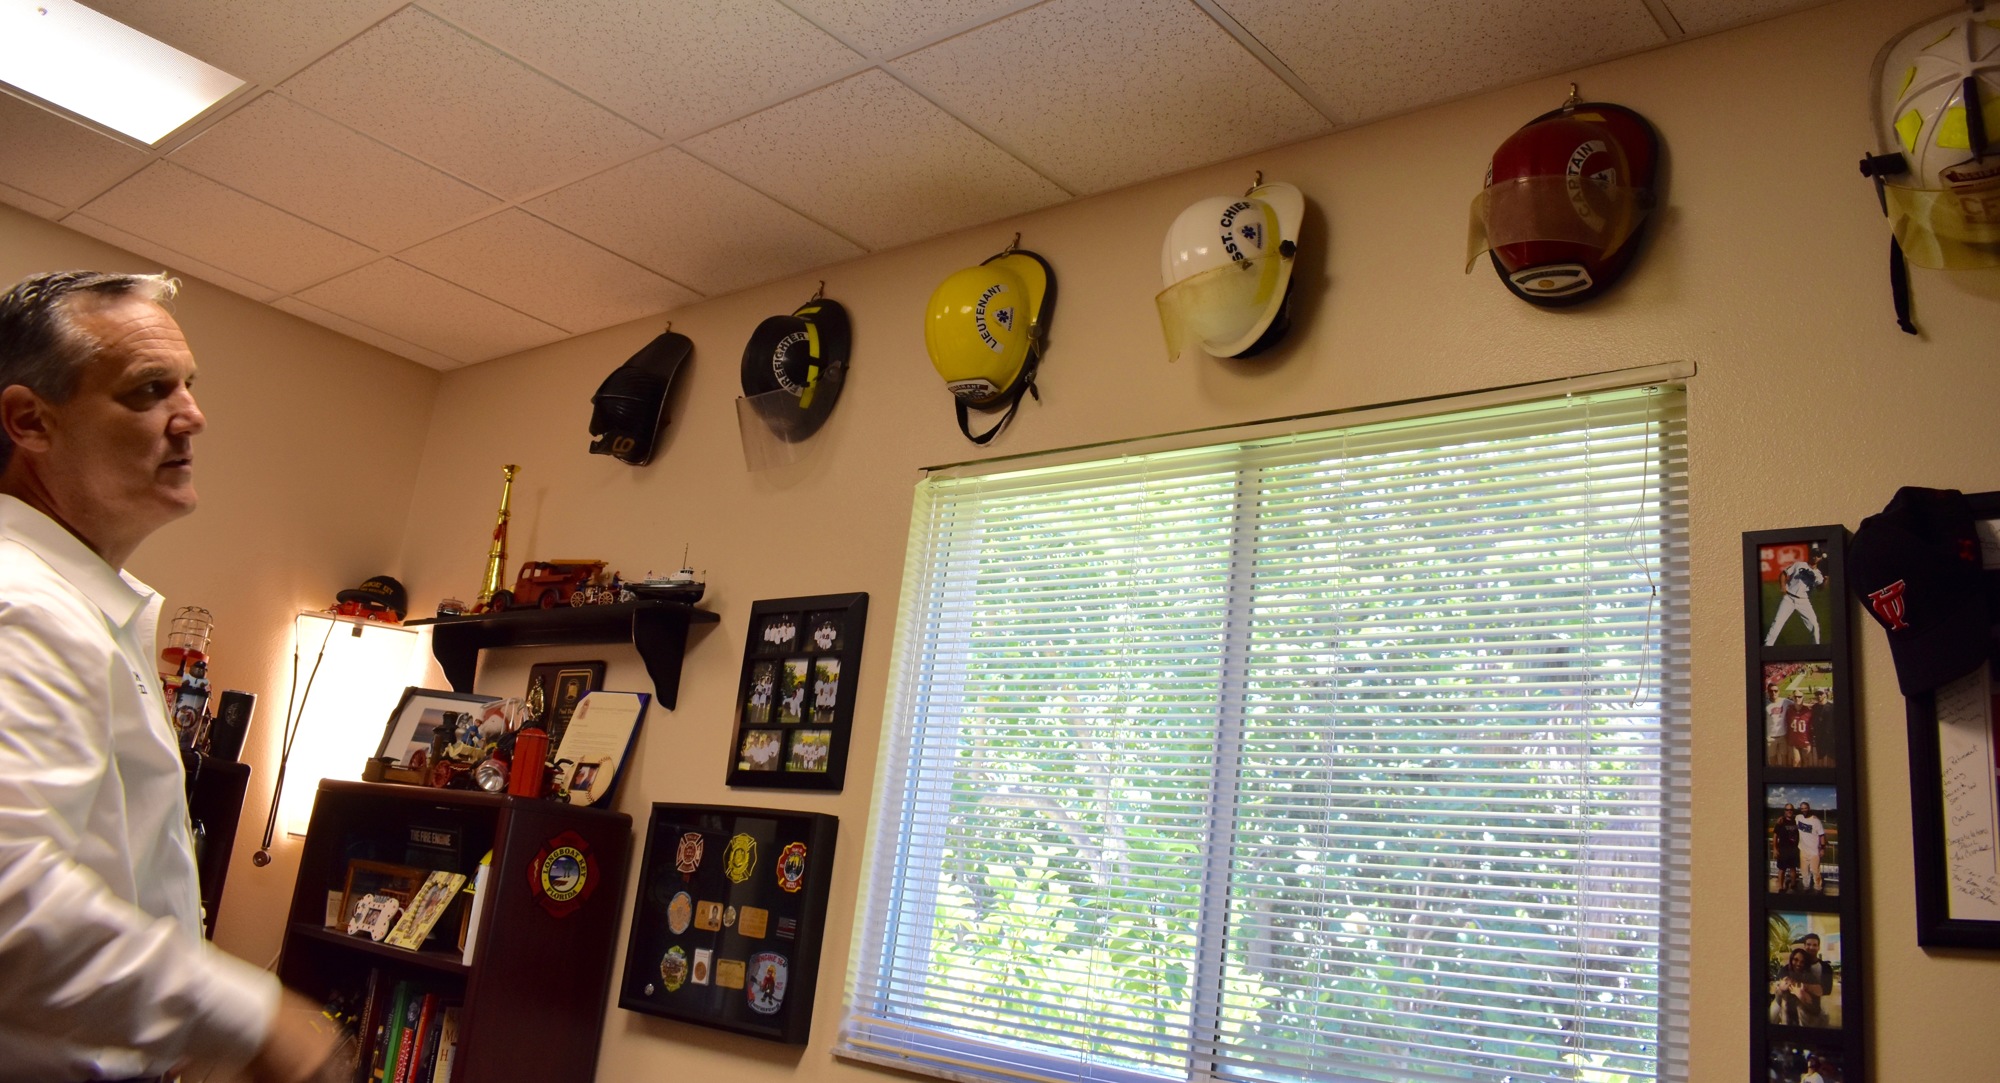 Dezzi examines his collection of fire helmets, which show, in part, the progression of his career.